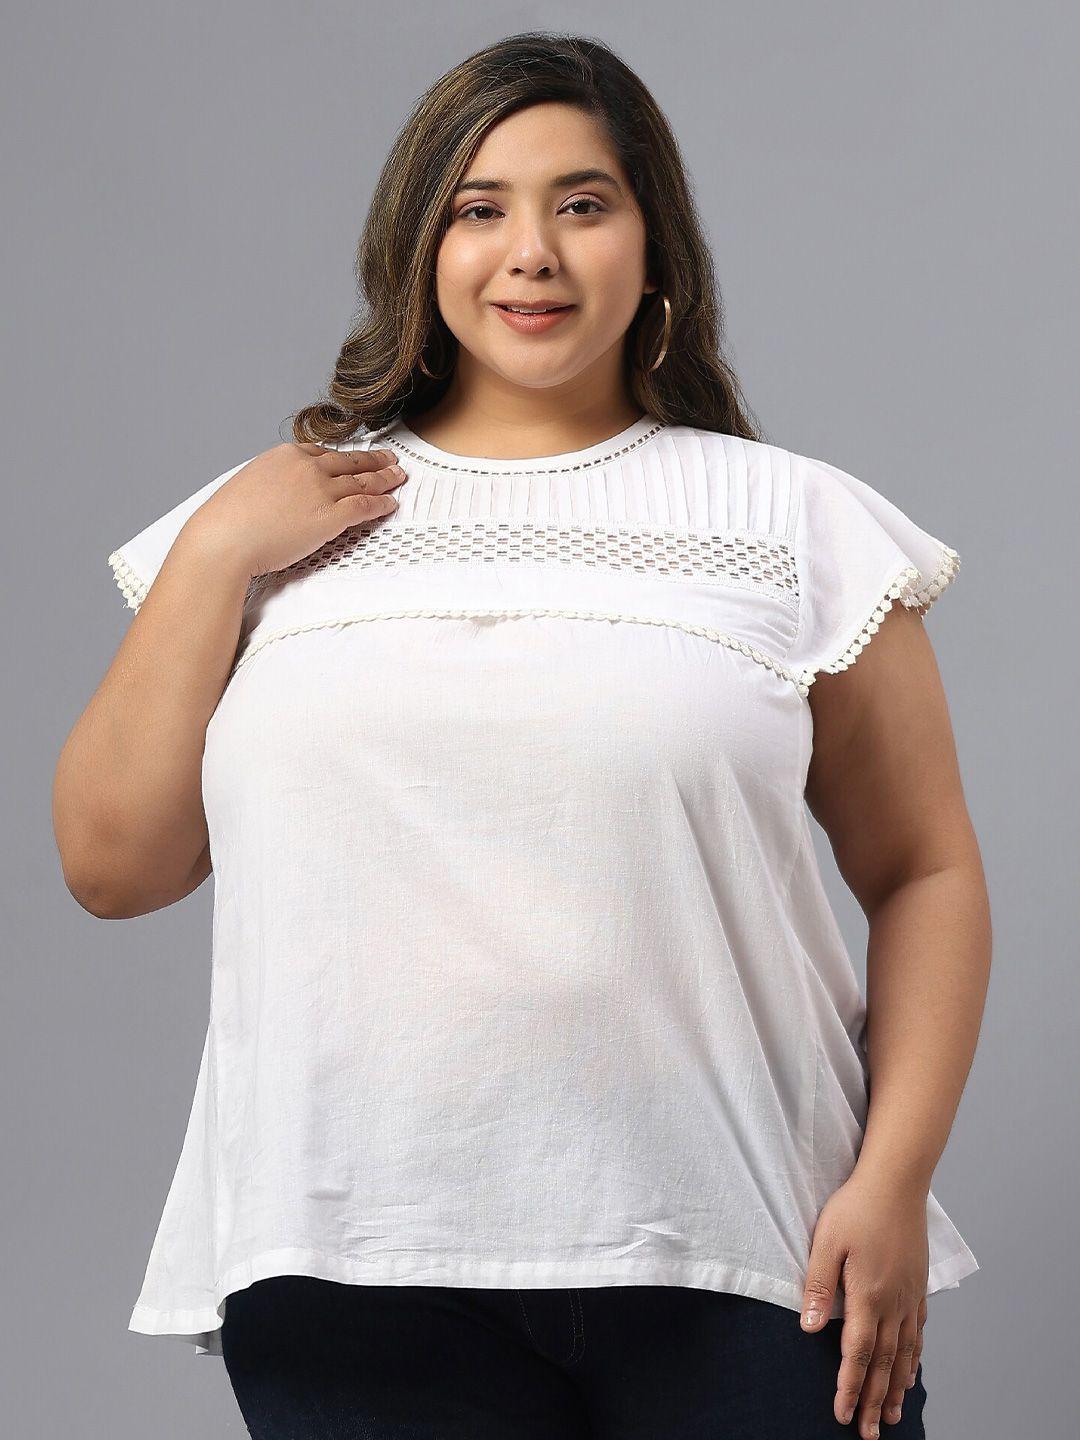 saakaa-plus-size-self-design-extended-sleeves-lace-inserts-detail-top